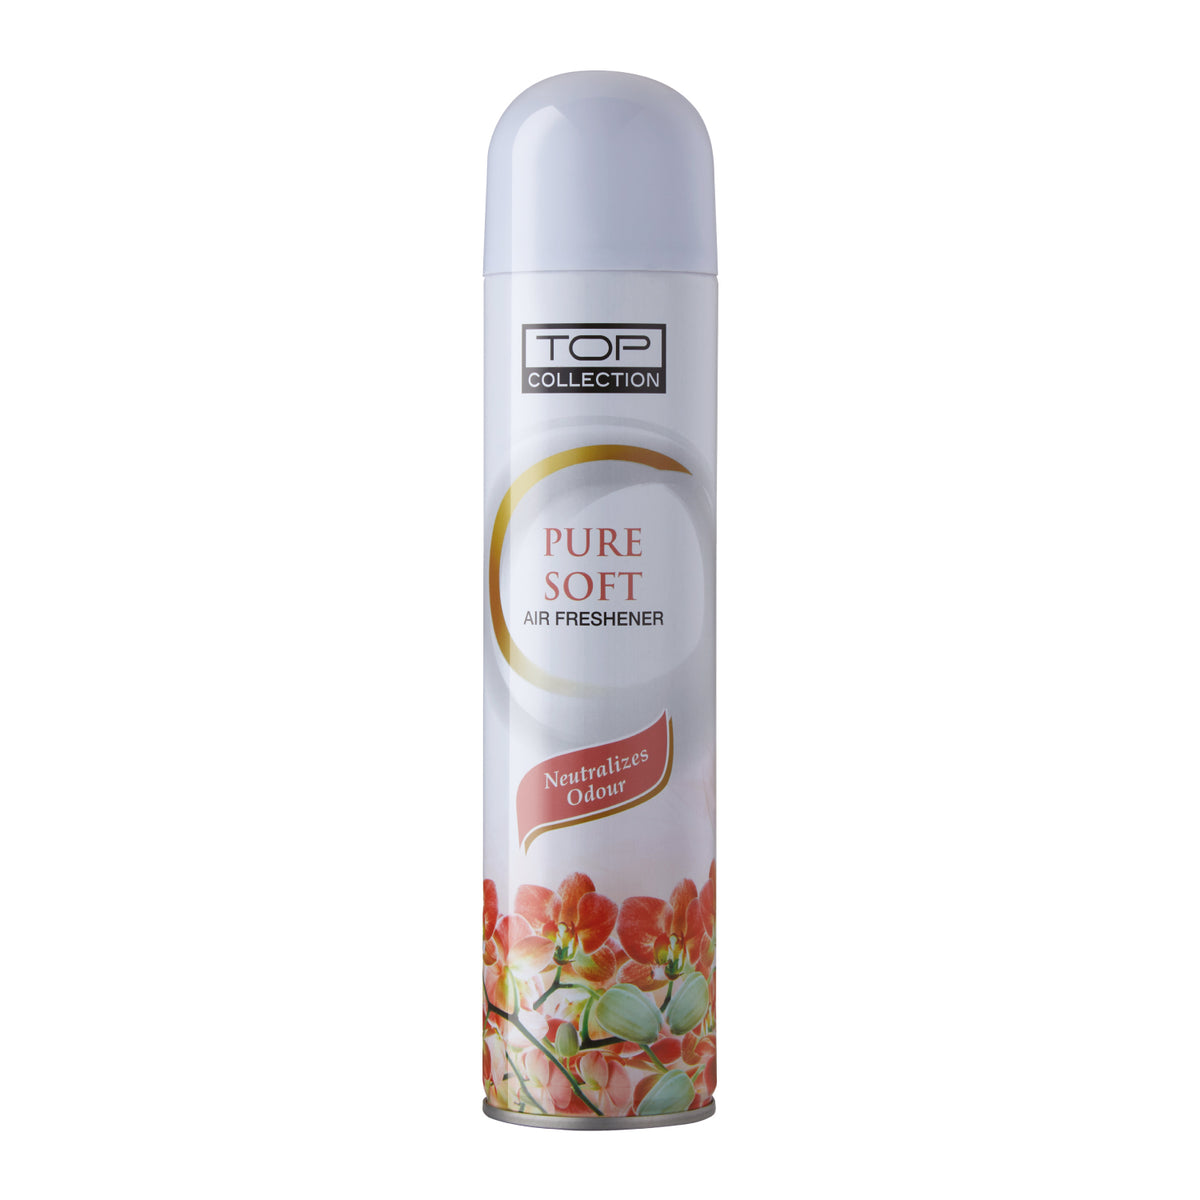 Top Collection Air Freshener - Pure Soft, 300ml Gardenia Cosmotrade LLP